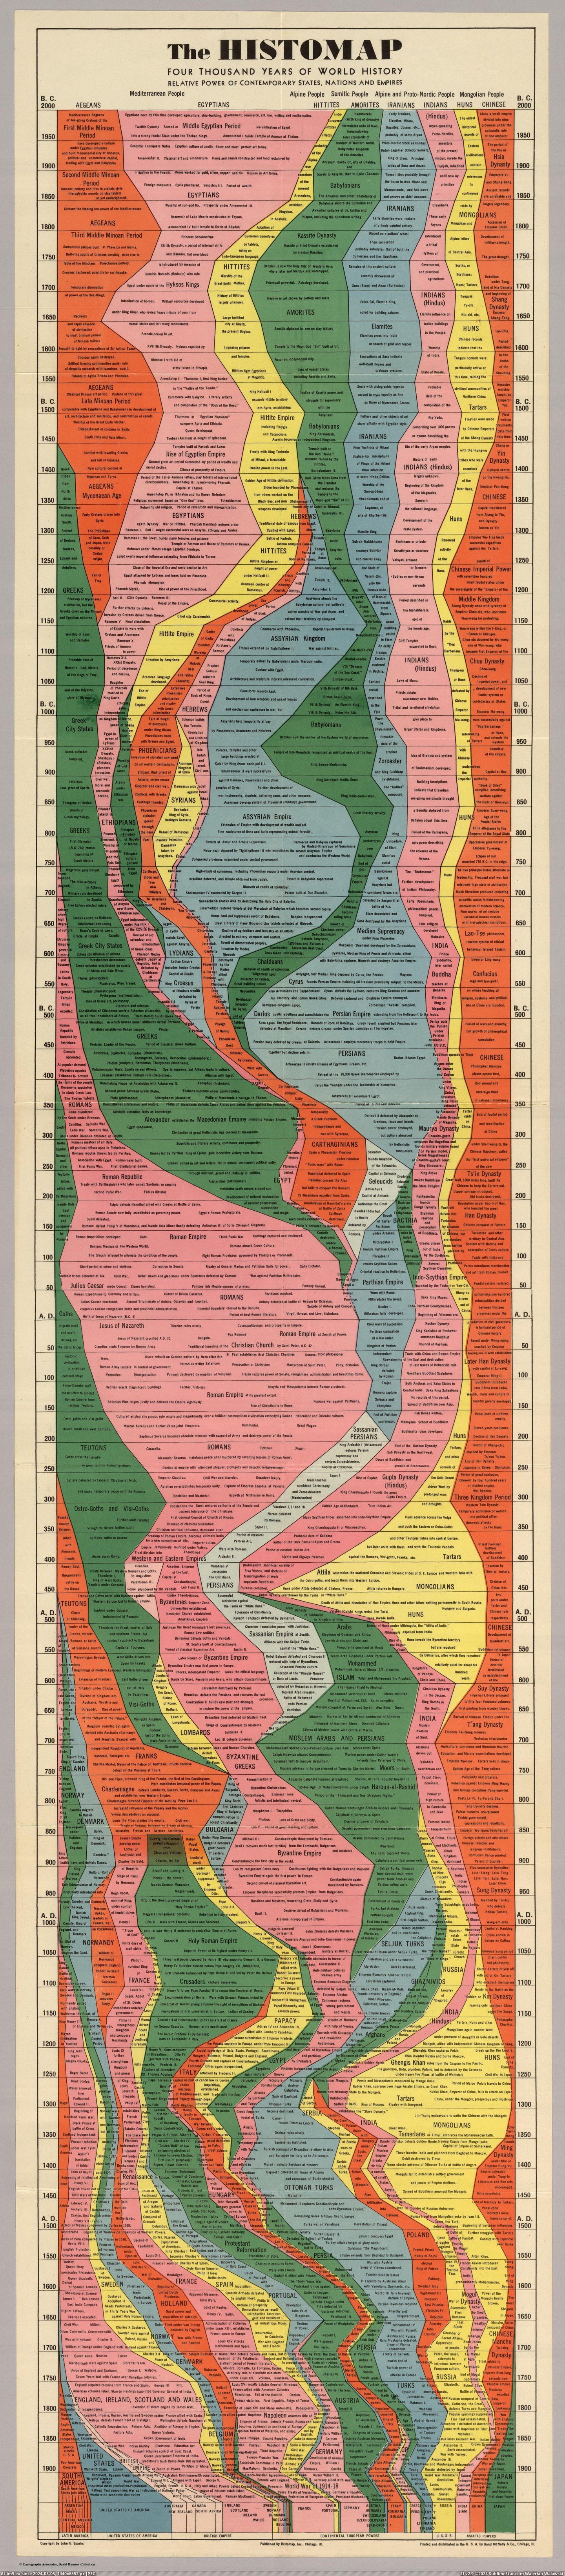 #Image #Years #Single #Empires #Historyporn #States #Power [Mapporn] The Histomap: 4000 years of power, states, cultures and empires in a single image [2097x9554] (historyporn) Pic. (Image of album My r/MAPS favs))